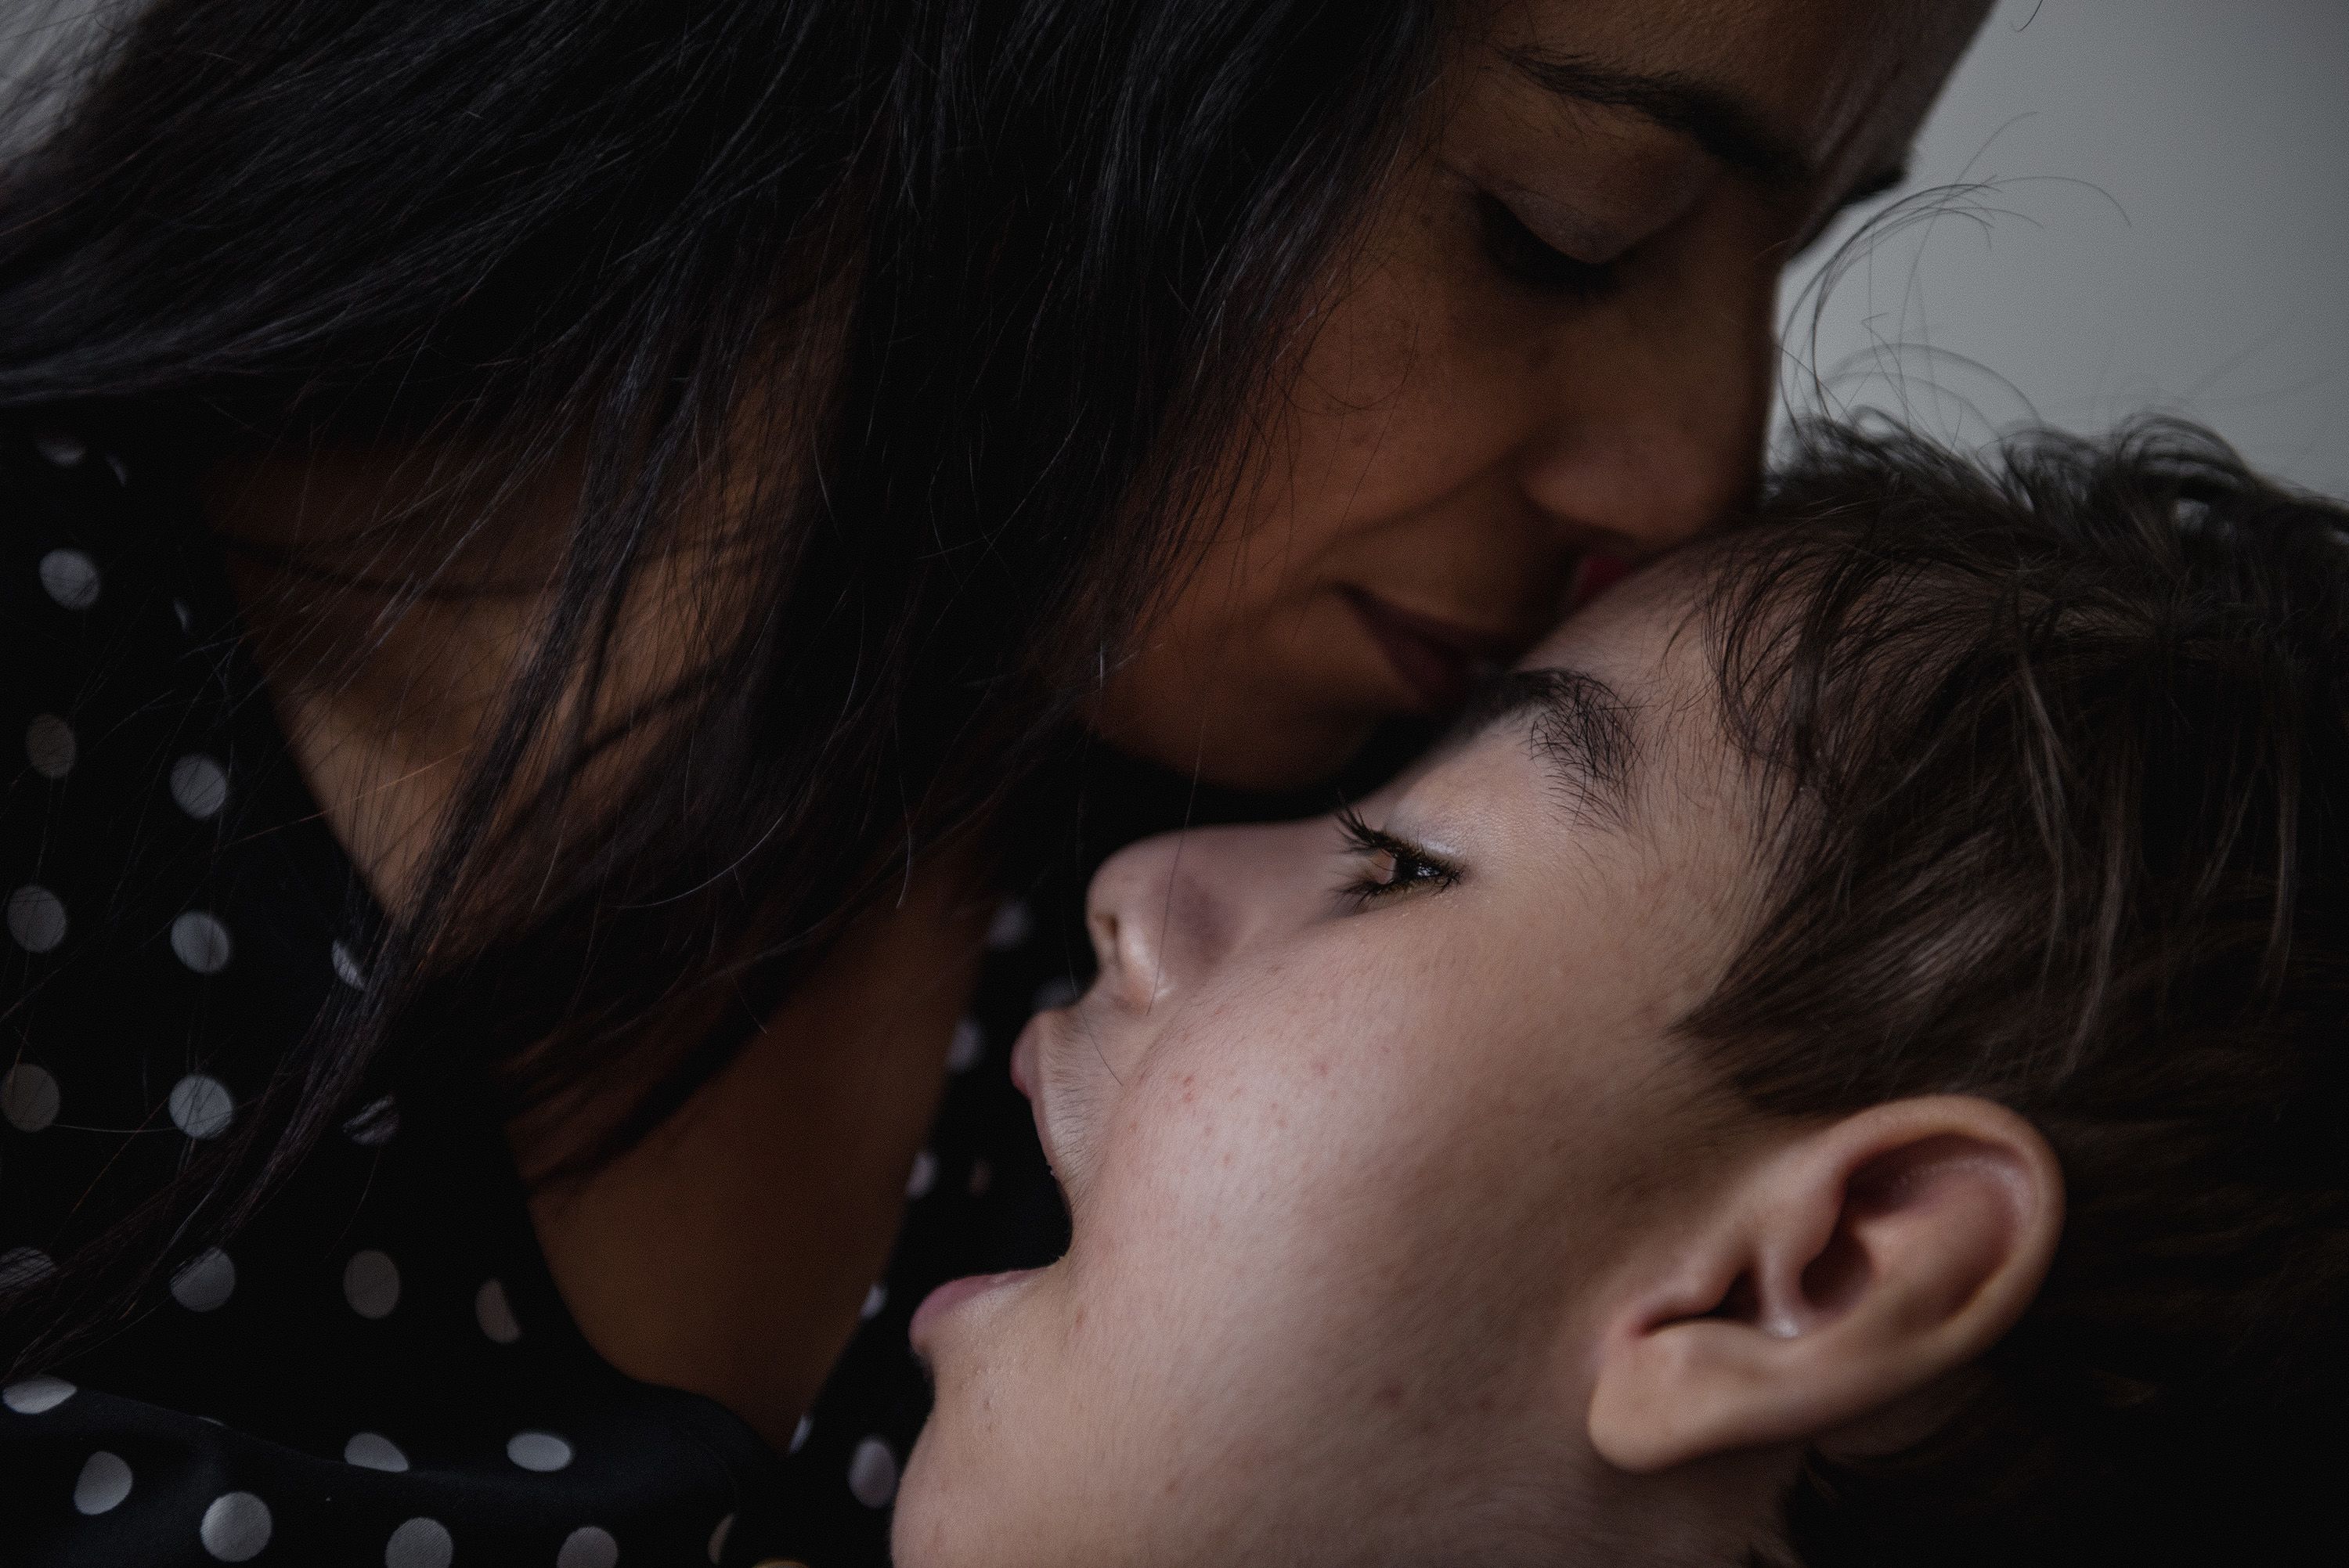 A woman named Regina kisses her son Davi, who was born with microcephaly, a condition where the baby's head is much smaller than expected. Davi was one of thousands of Brazilian children born with the condition during a Zika virus outbreak a few years ago. The doctor told her that her son was going to die and that she should get used to it, Regina told photographer <a href="https://mairaerlich.com/" target="_blank" target="_blank">Maíra Erlich</a>. "How does a doctor say that?" Regina said. "So, I asked him, 'Are you God?' He told me Davi had a tiny head, and I said: 'He's beautiful.' That's it.' "